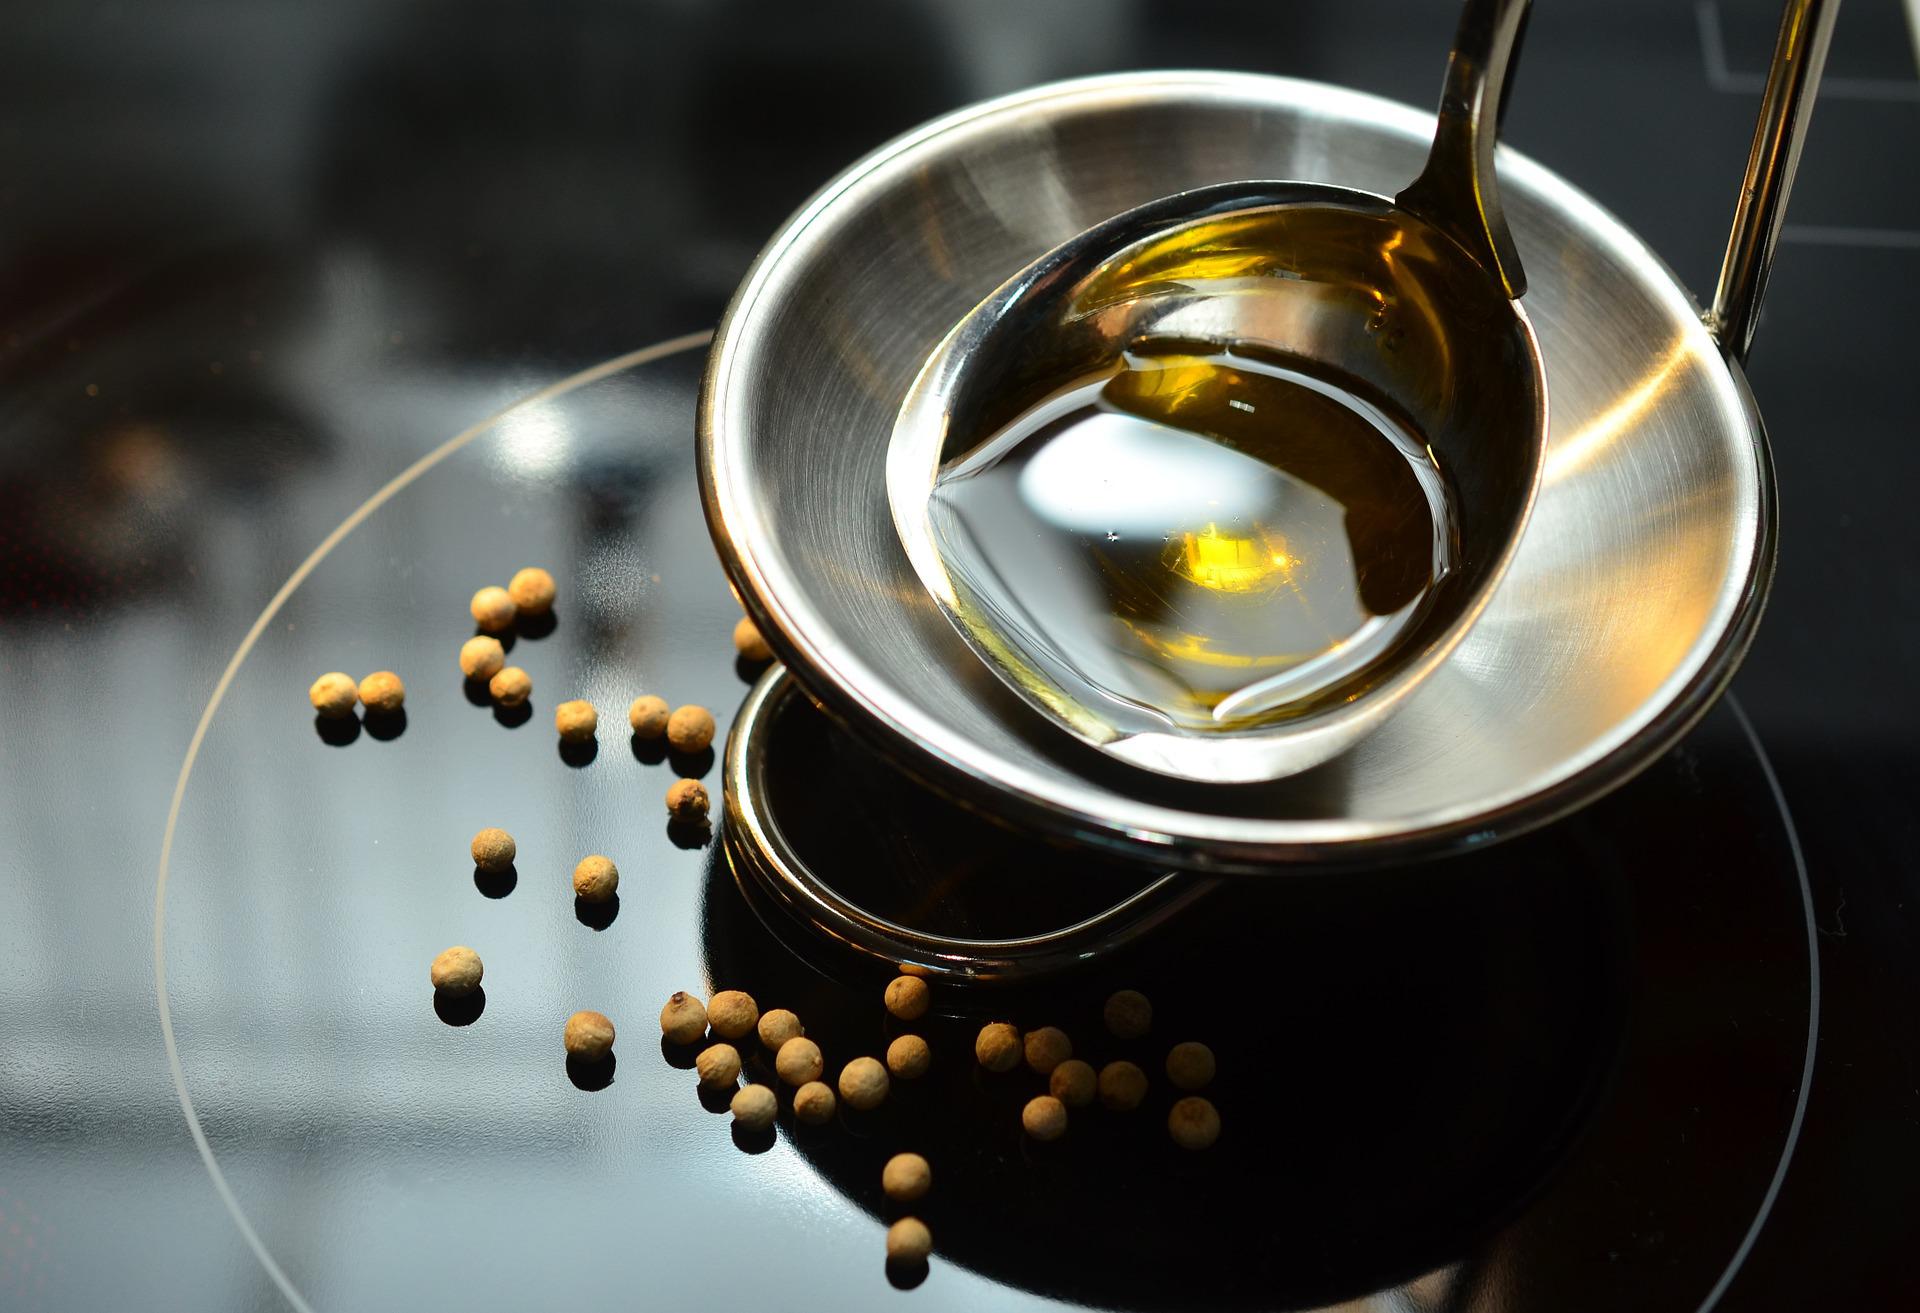 How Do I Dispose Of A Large Amount Of Cooking Oil?